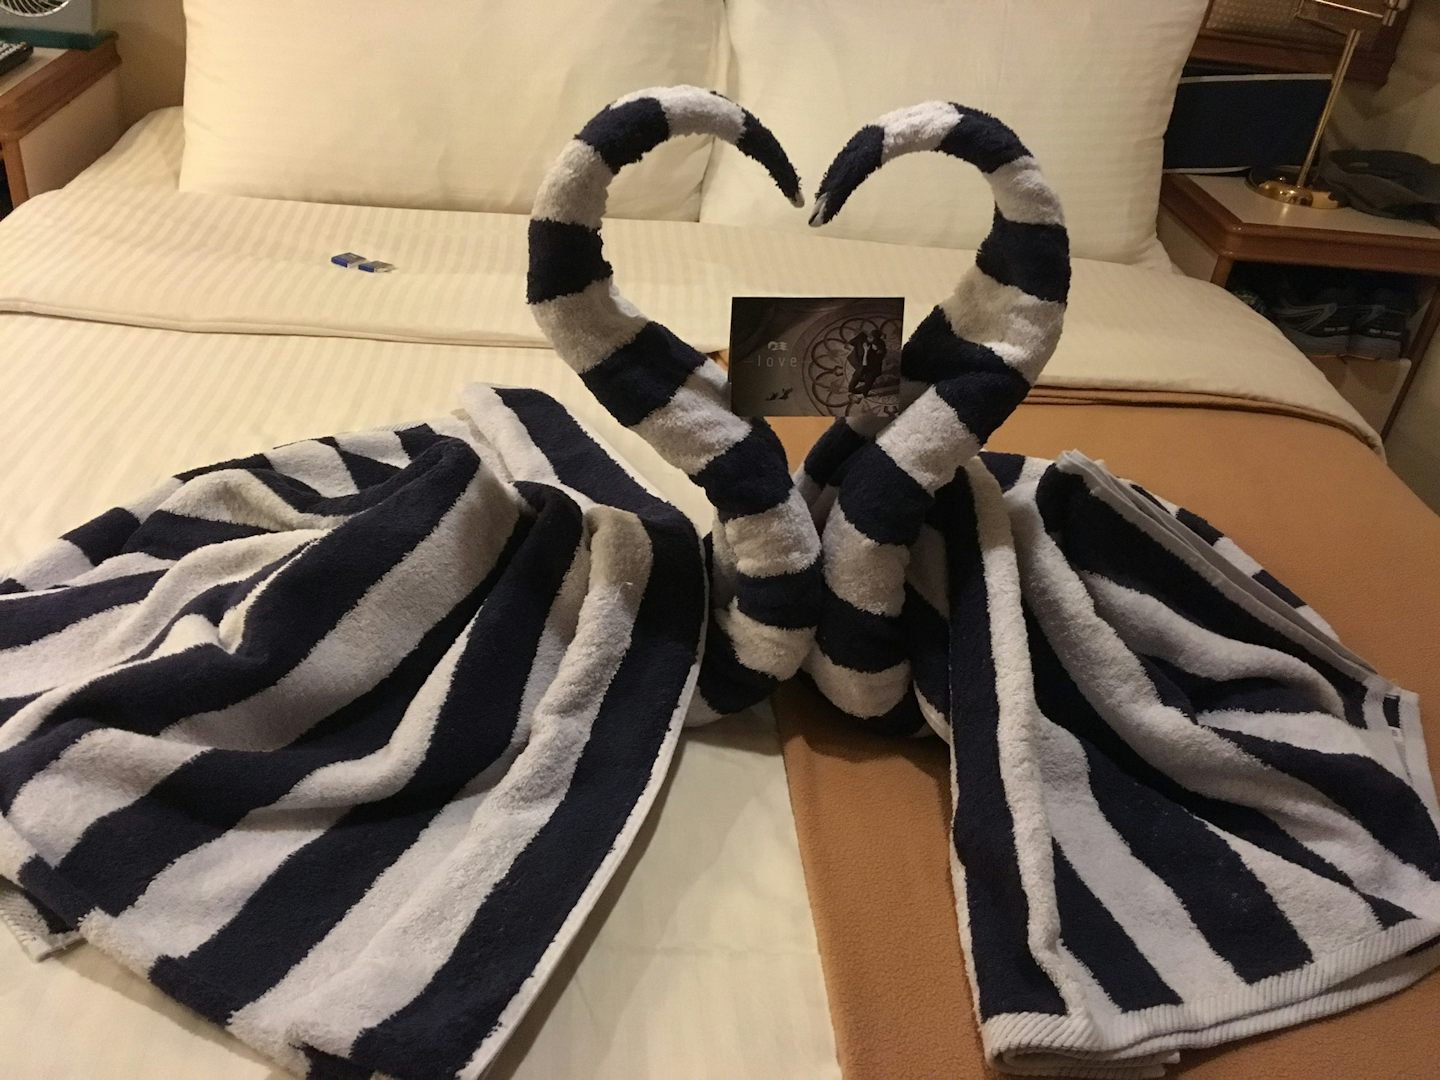 Princes cruises helped us celebrate our 42nd wedding anniversary. Our room store made this wonderful towel animal for us.